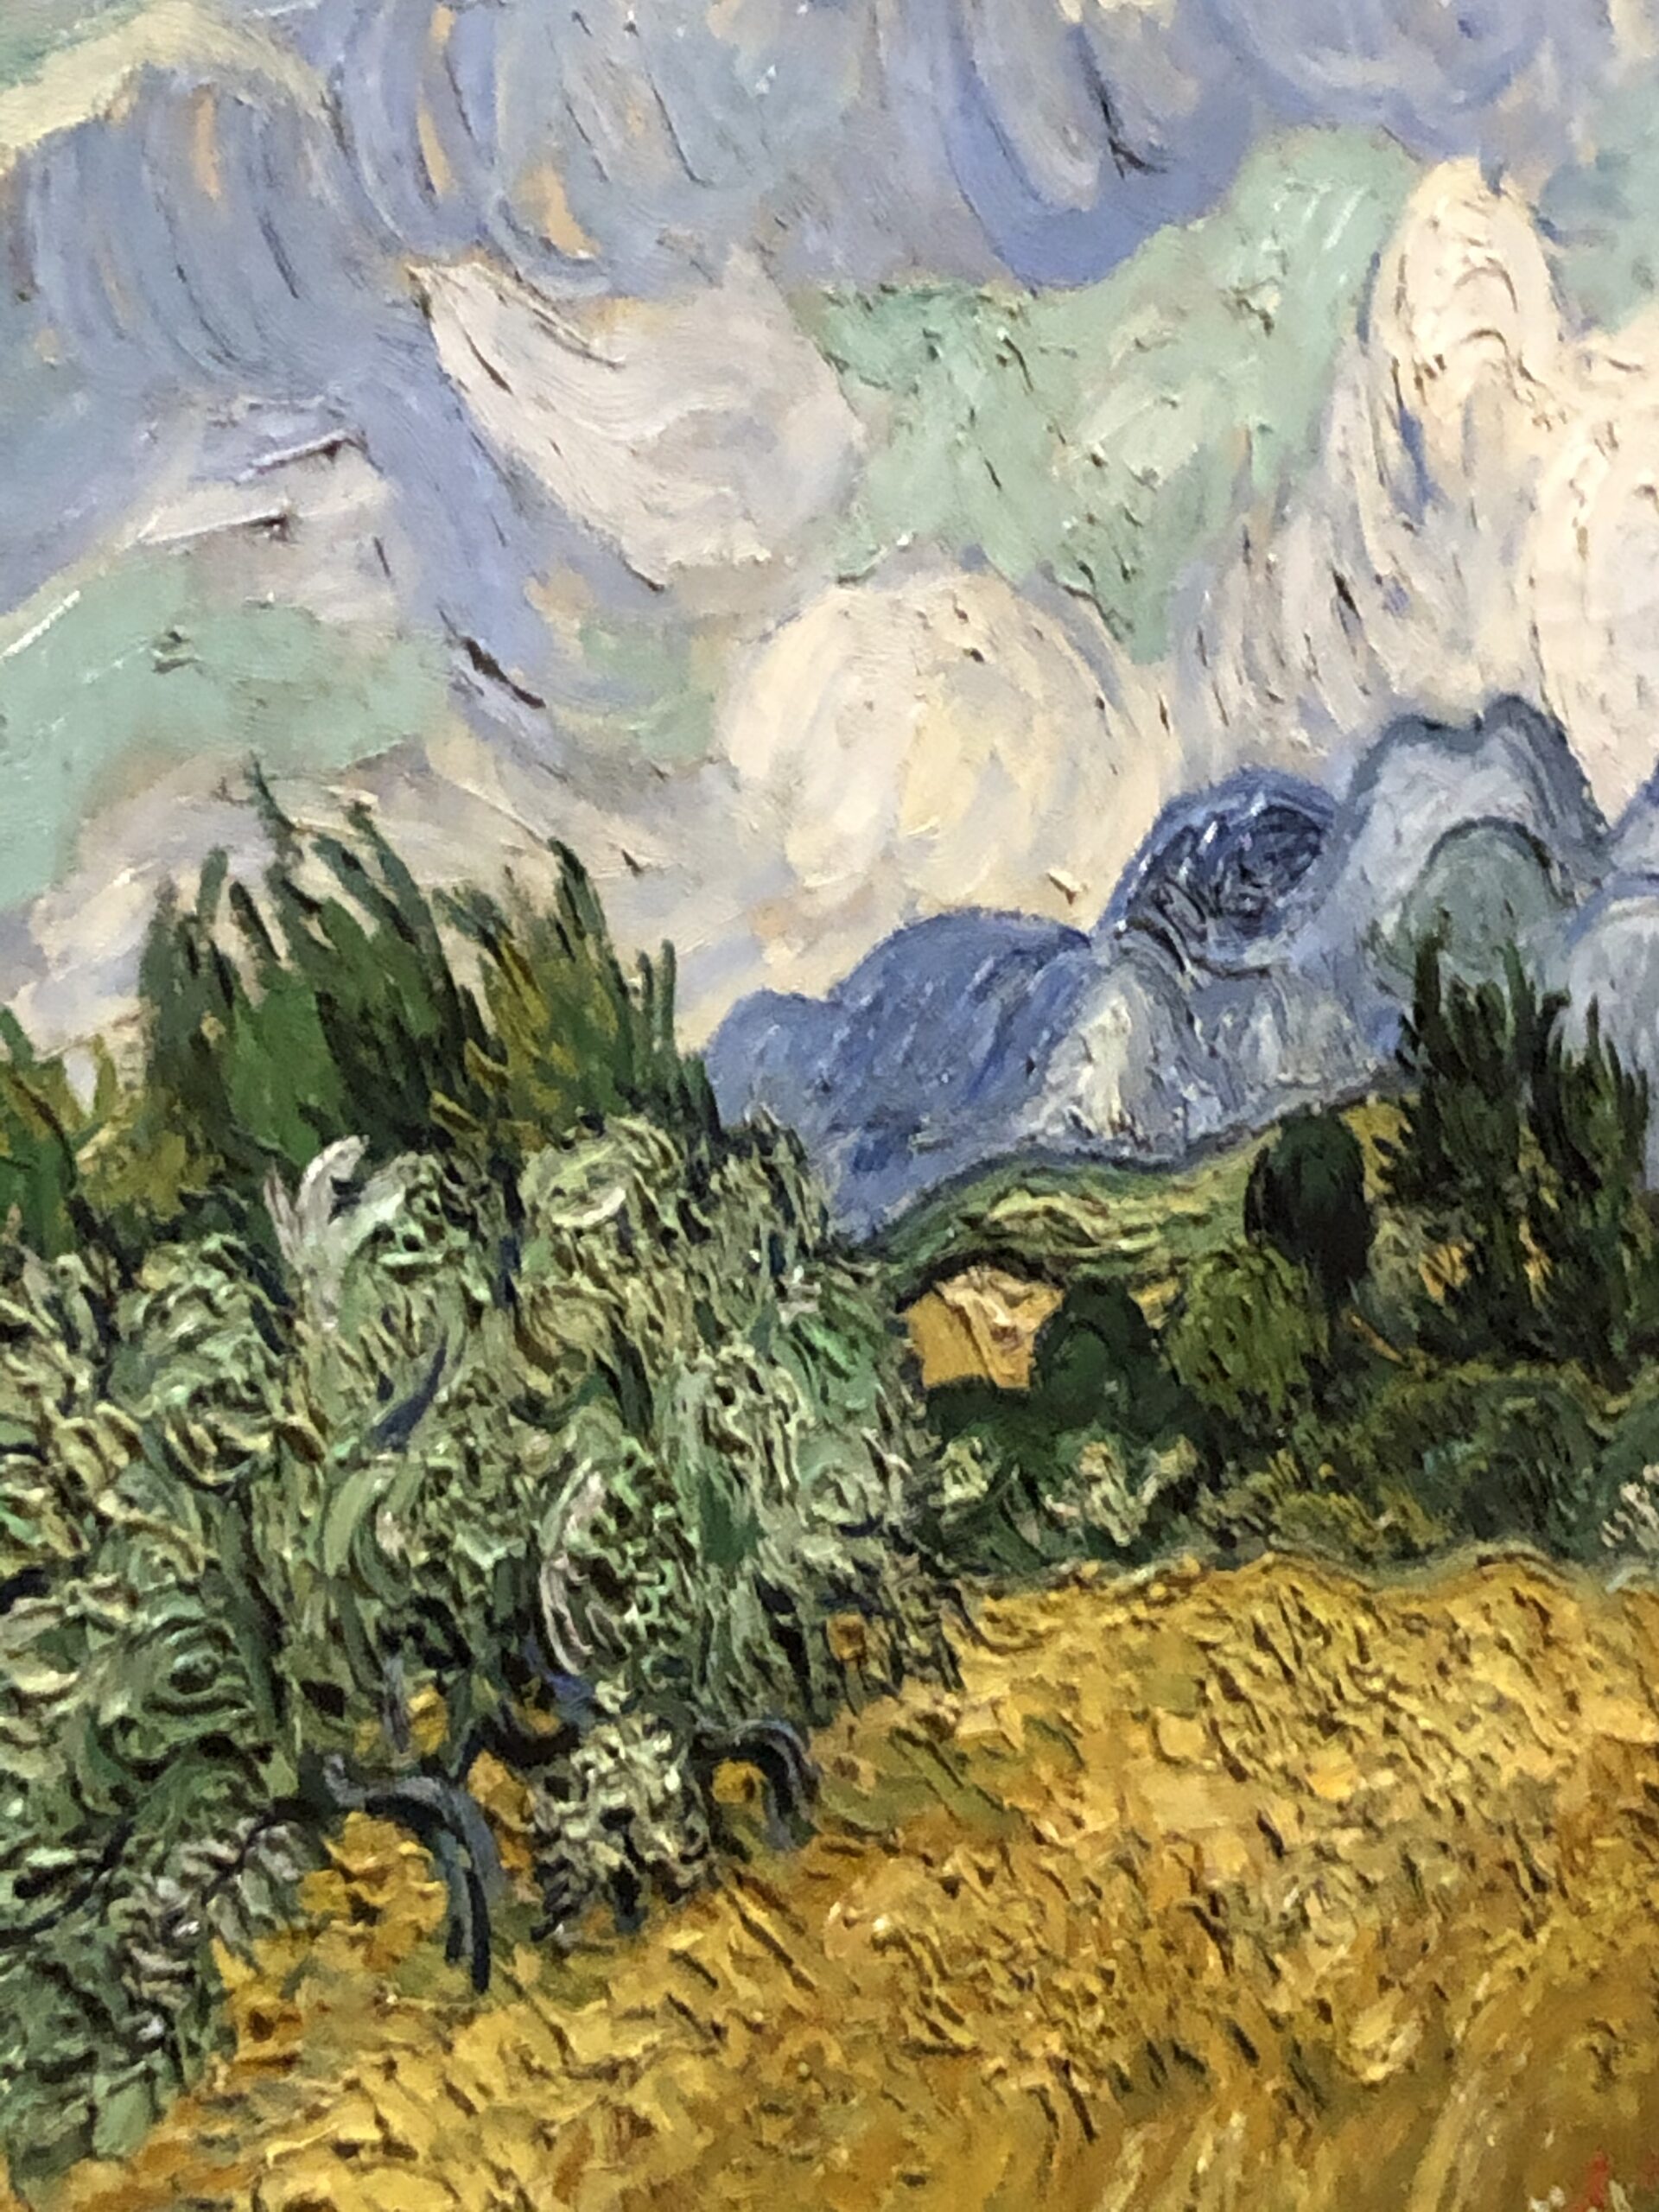 The Feel and Texture of a Van Gogh - The David Snider